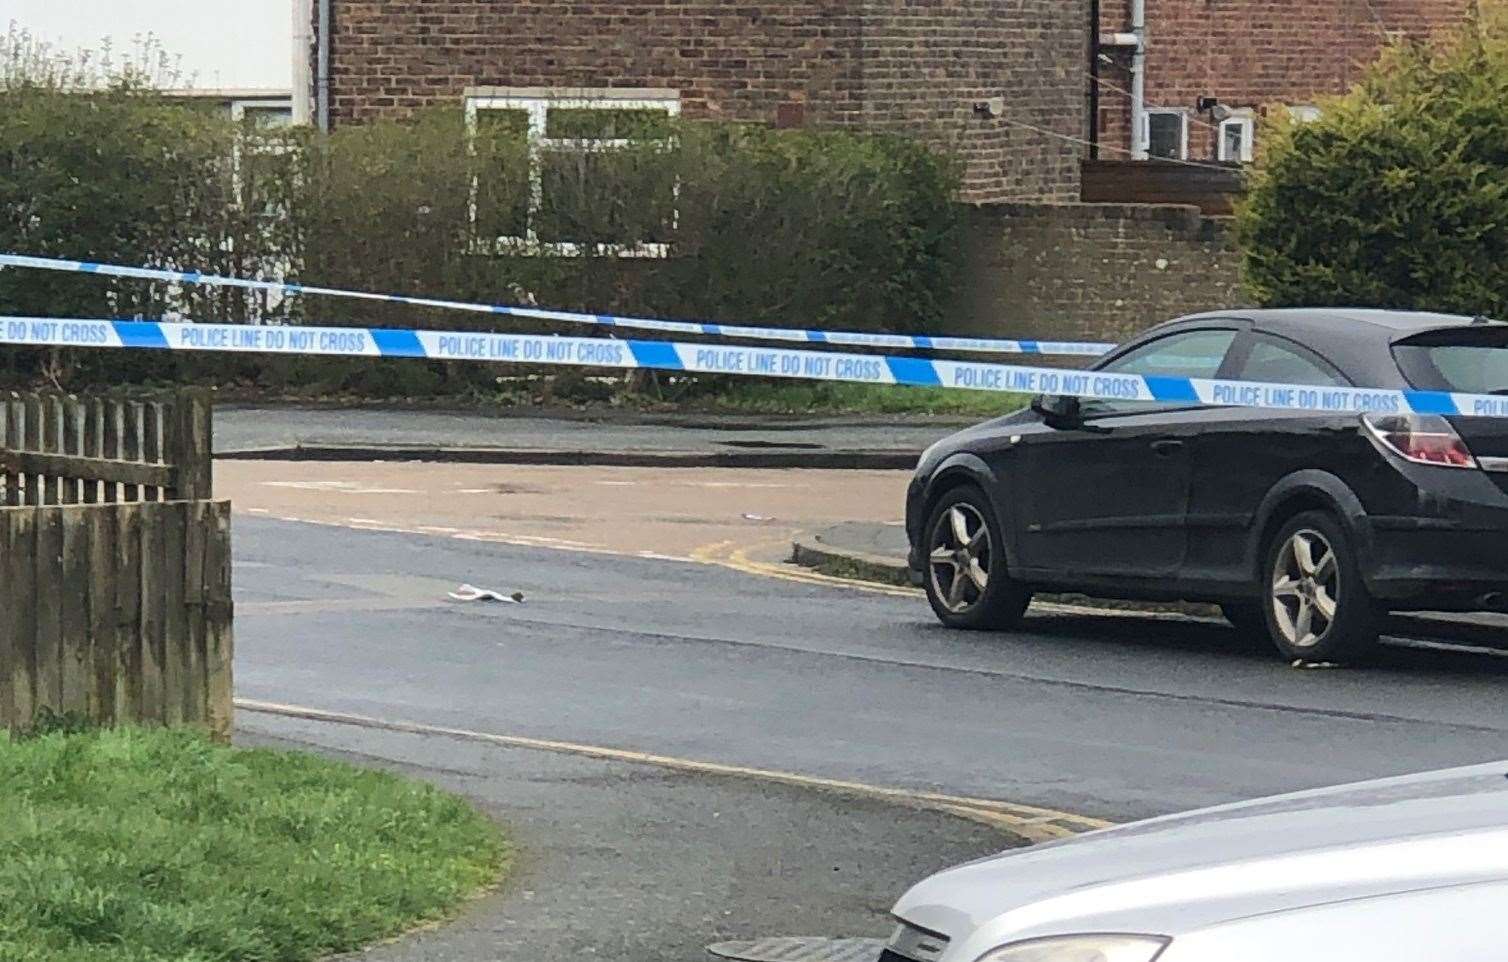 Police have taped off the road following the incident